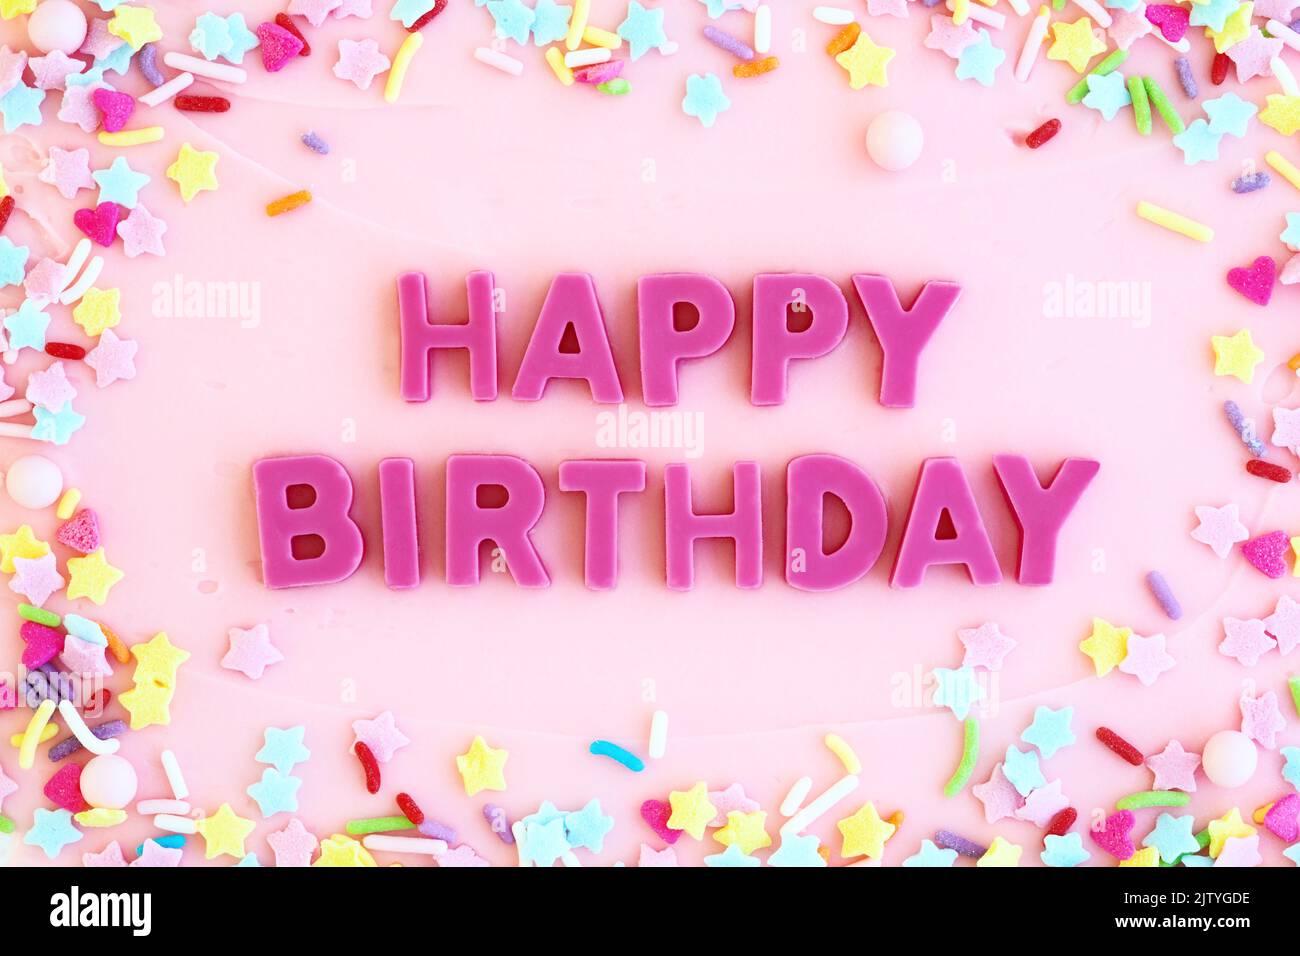 Pink frosted birthday cake with pink chocolate happy birthday message and sprinkles Stock Photo